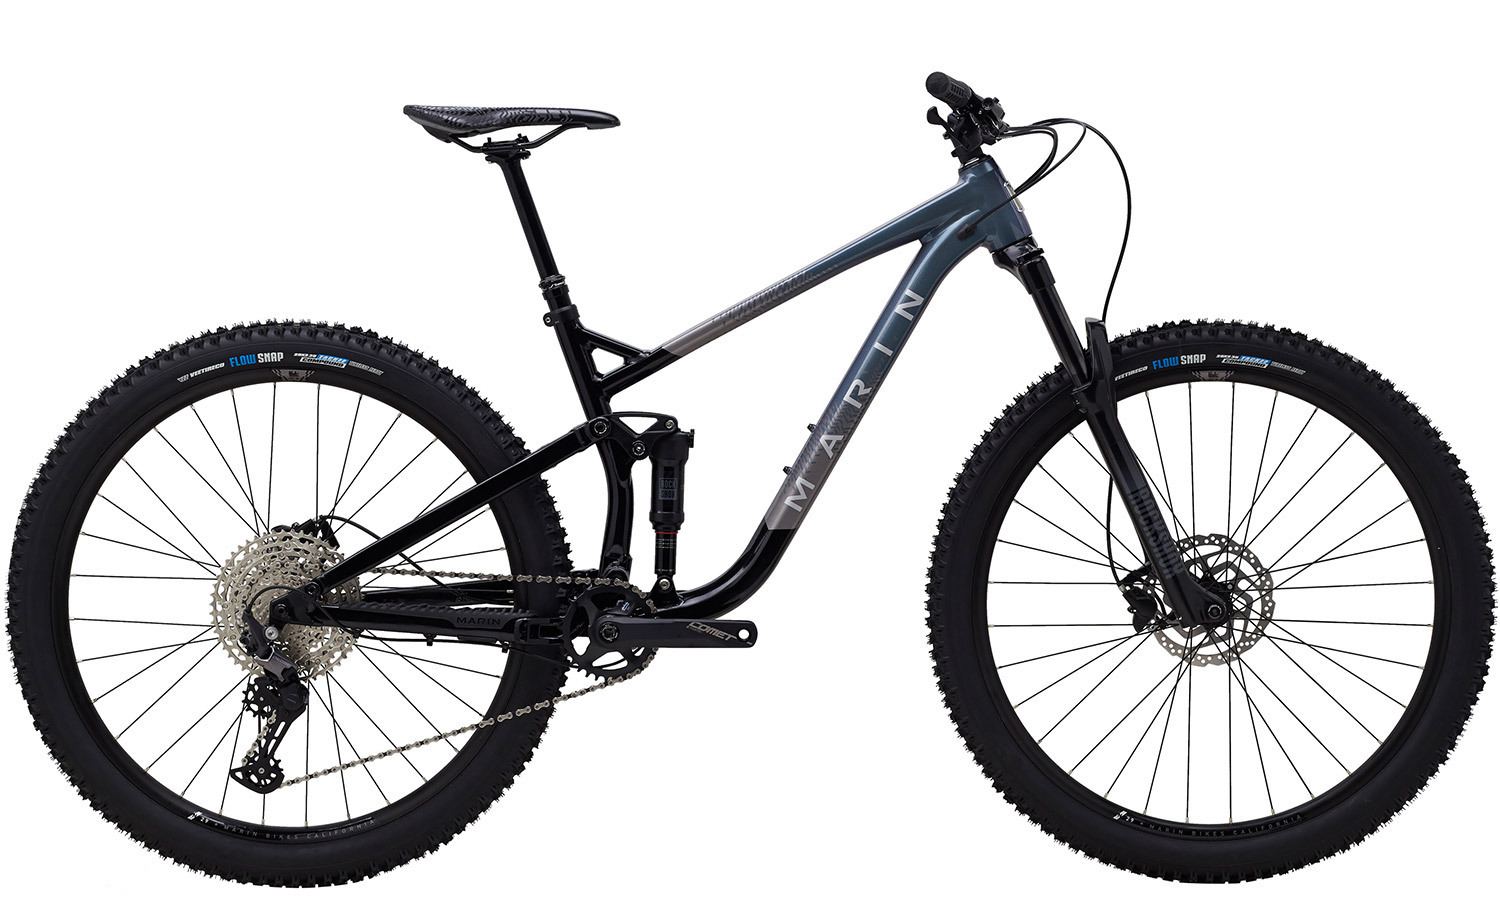 What is a 29 mountain bike? Suspension